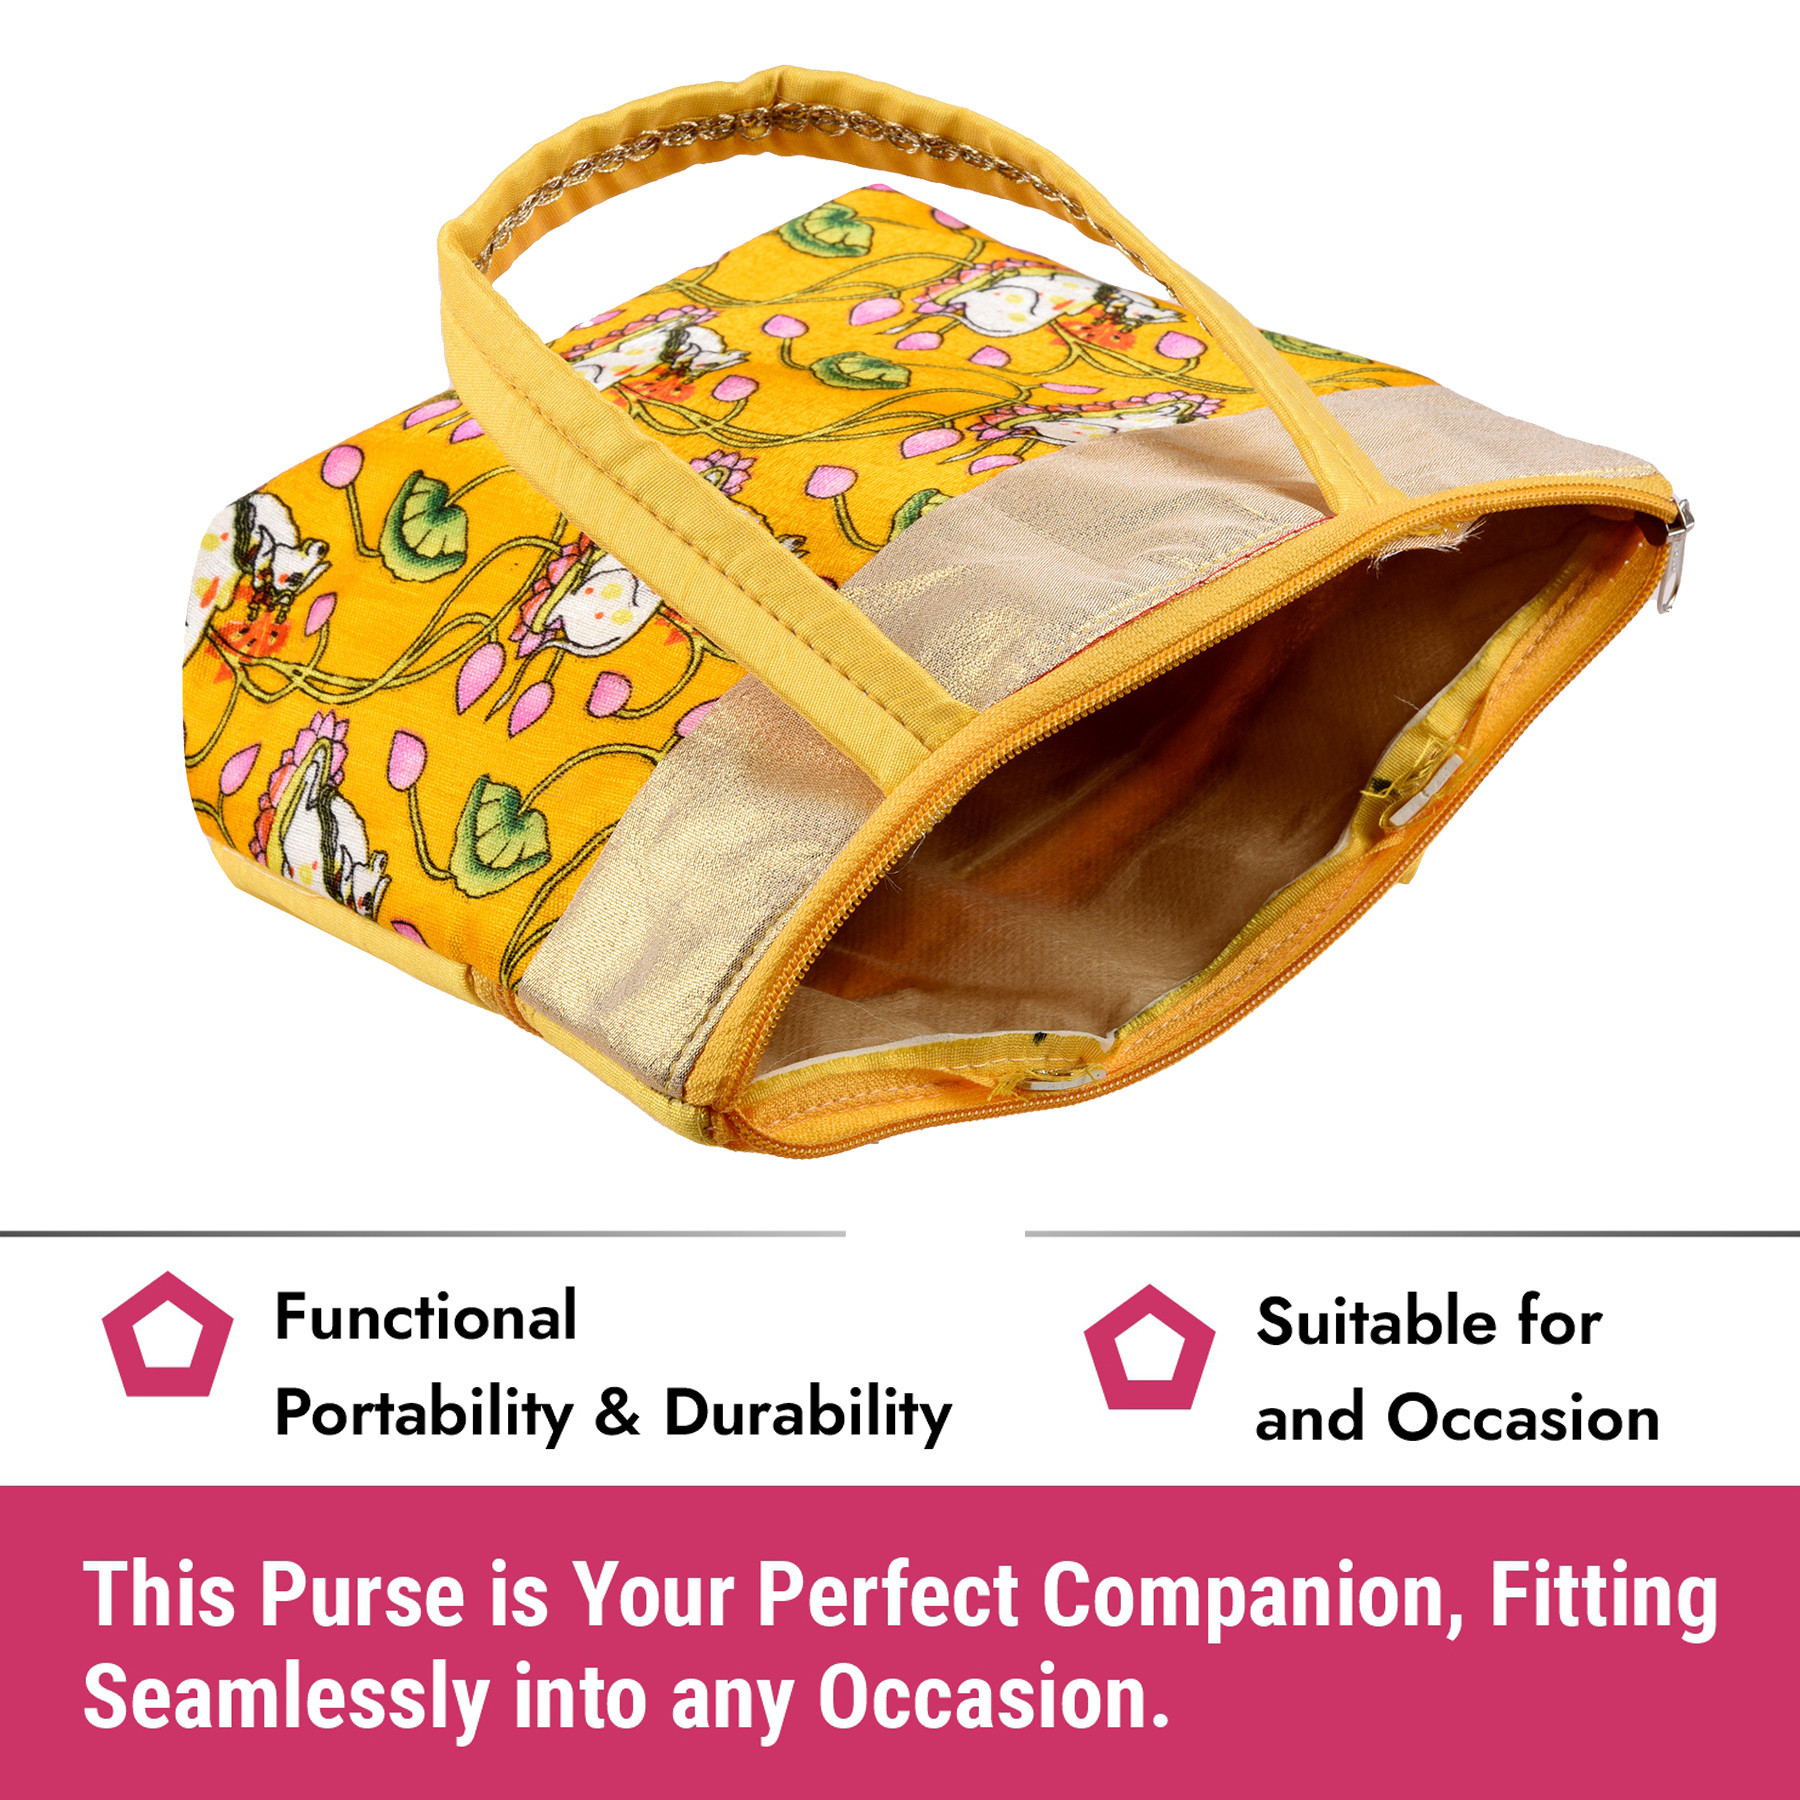 Kuber Industries Hand Purse | Traditional Mini Hand Bag | Silk Wallet Hand Bag | Shagun Hand Purse | Woman Tote Hand Bag | Gifts Hand Bag | Cow-Small Hand Purse | Pack of 3 | Multi